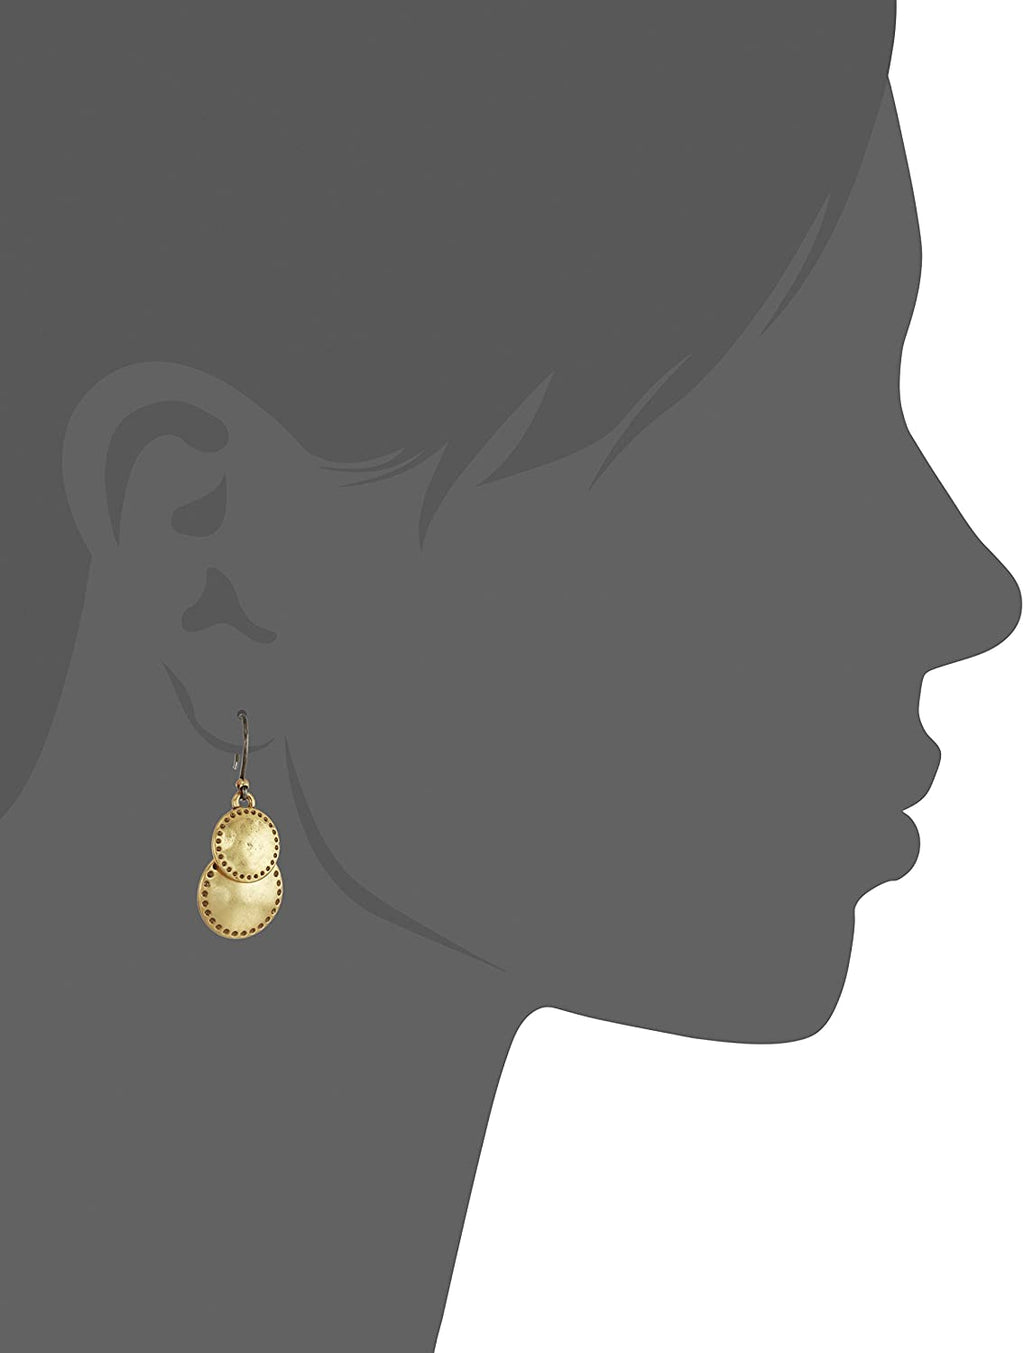 Lucky Brand Double Drop Earrings, Gold, One Size